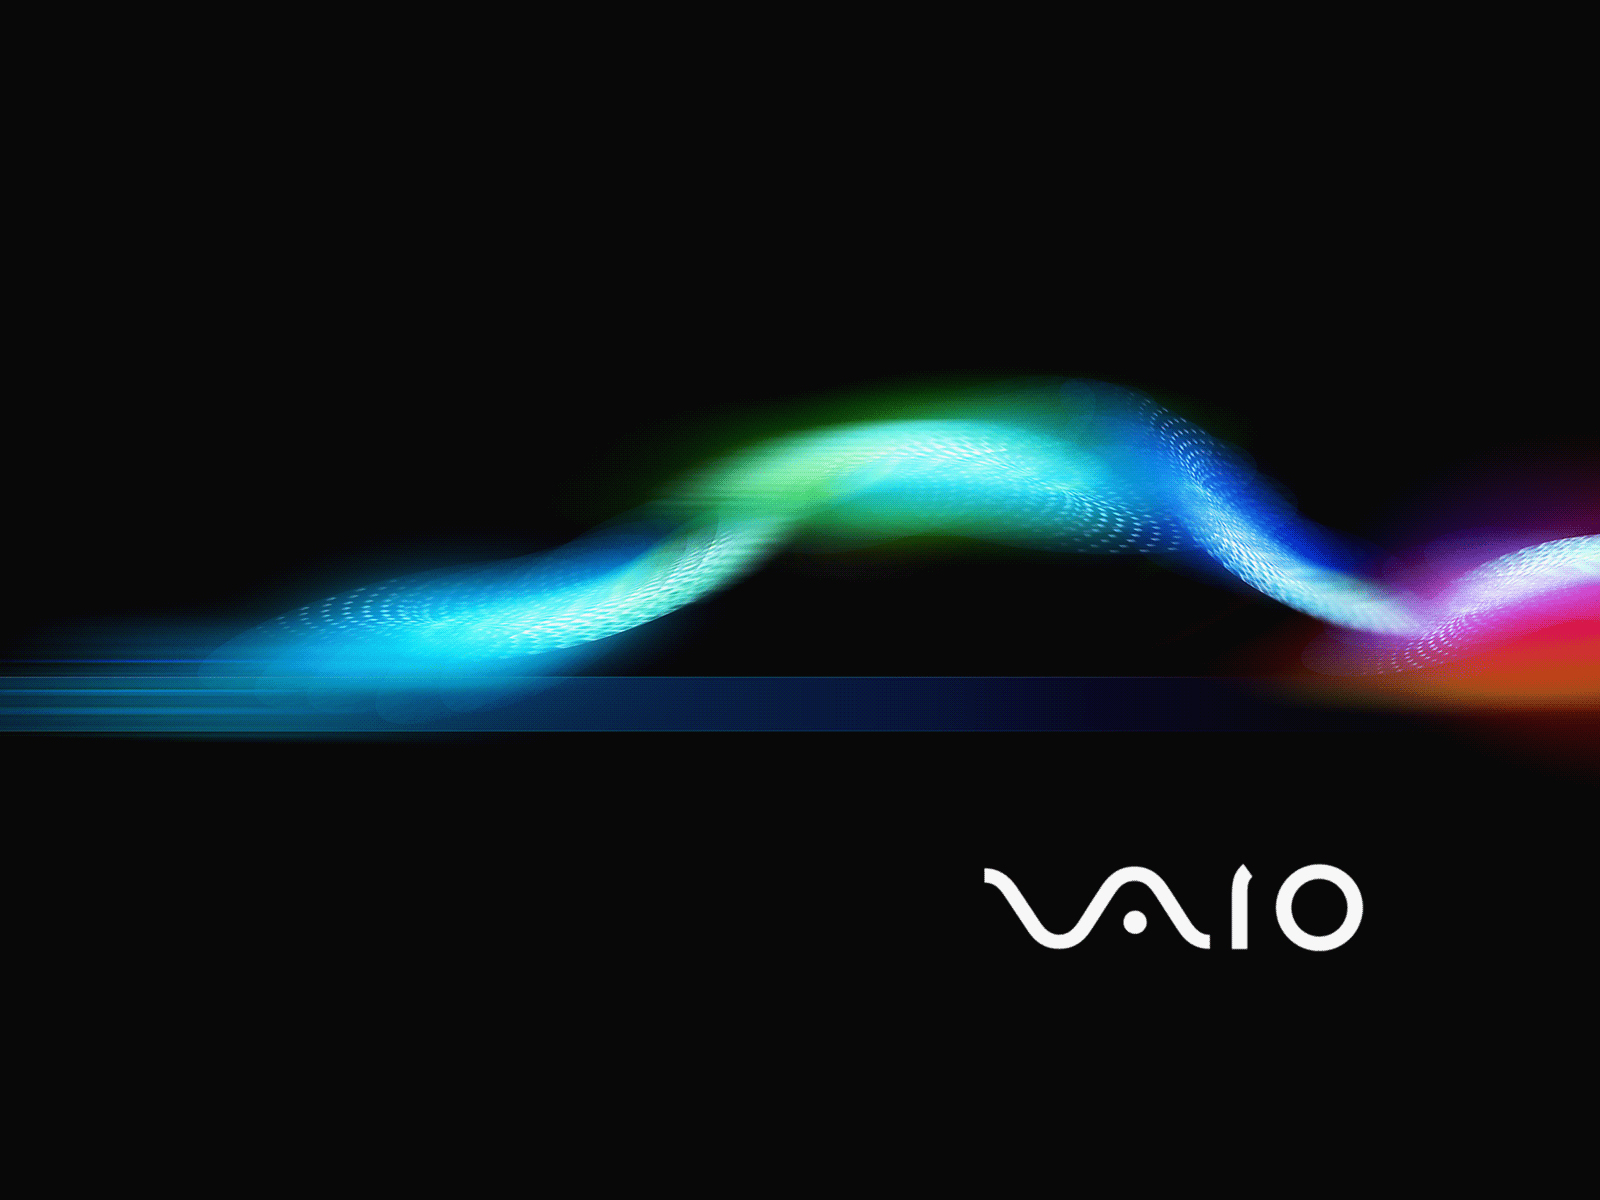 HD Sony Vaio Wallpapers Vaio Backgrounds For Free Download